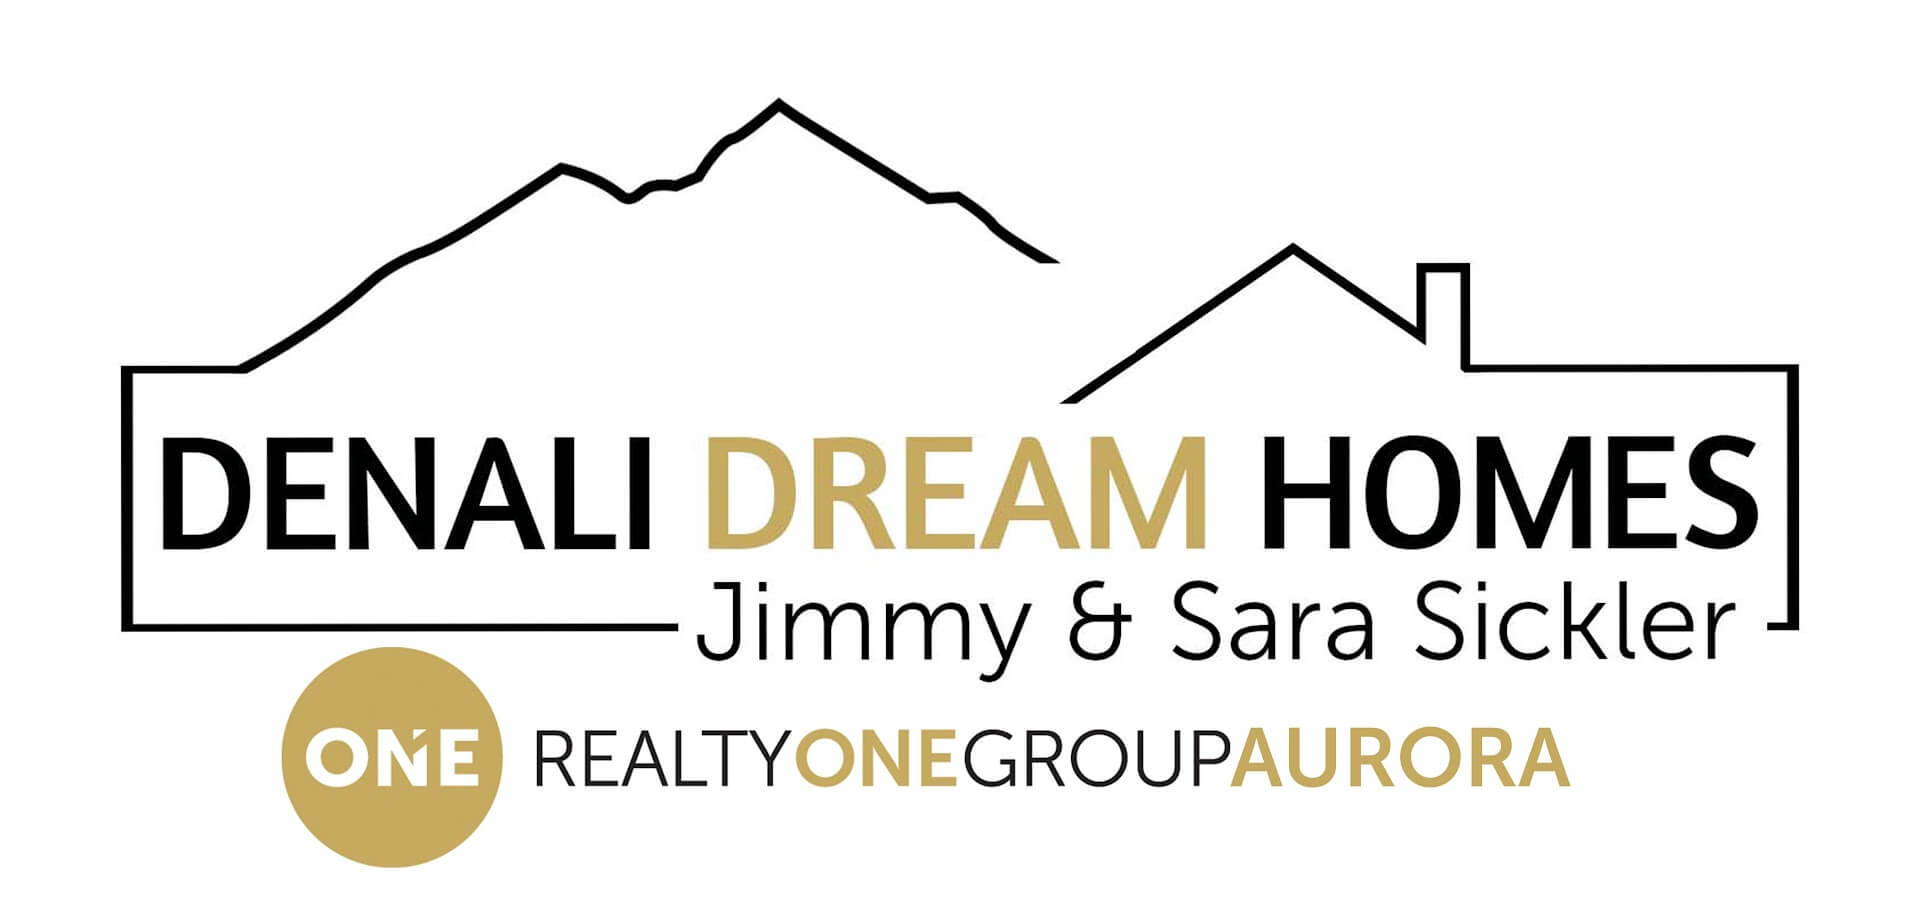 Denali Dream Homes powered by Realty ONE Group Aurora